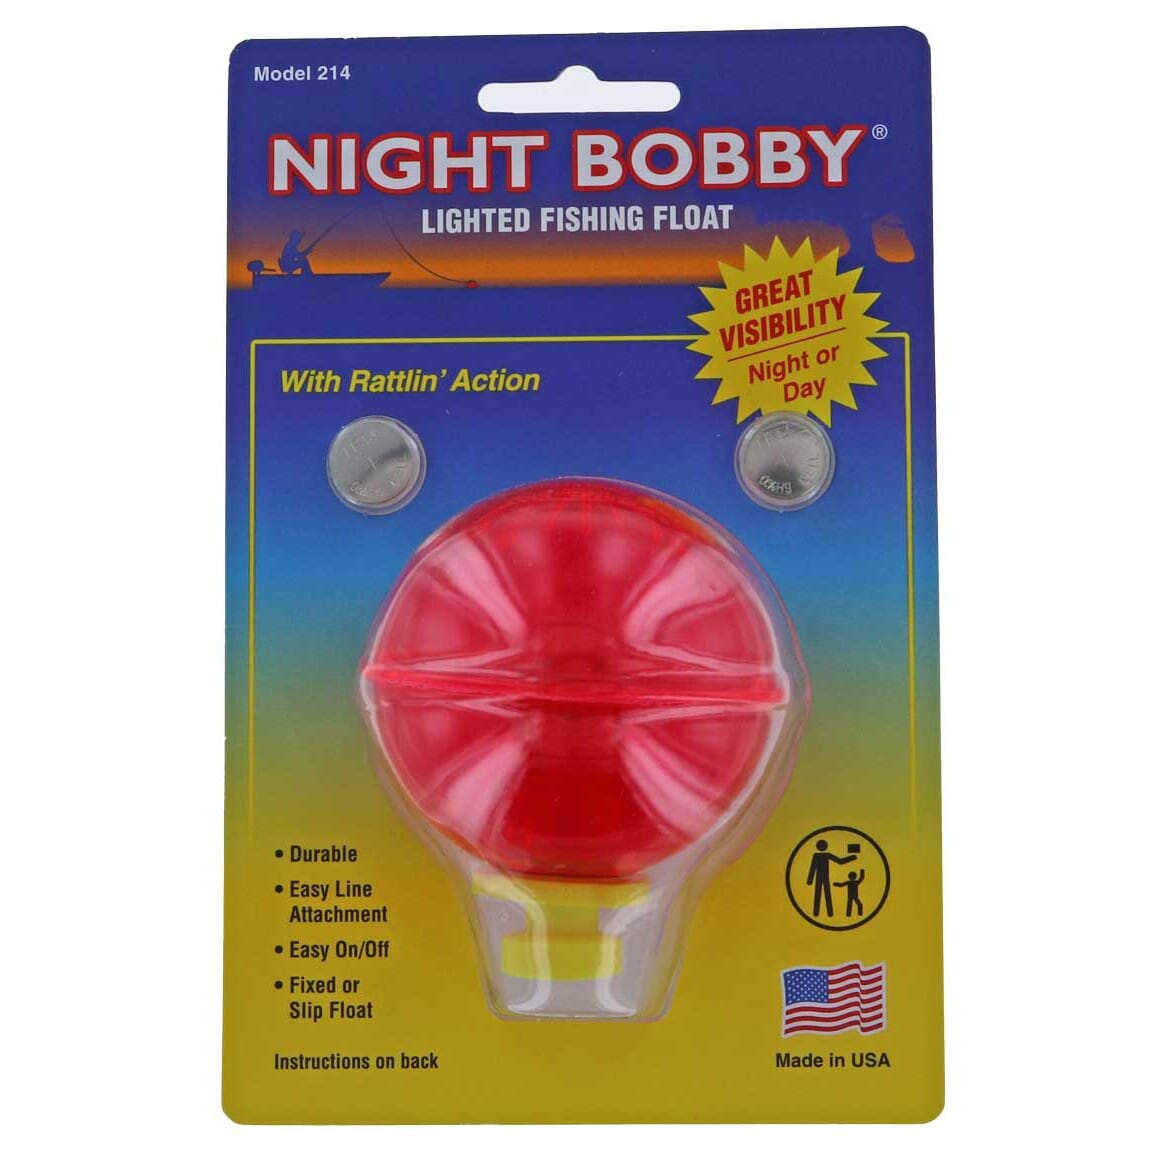 Night Bobby Lighted Fishing Float, Orange, W/ Rattlin' Action Fast Shipping